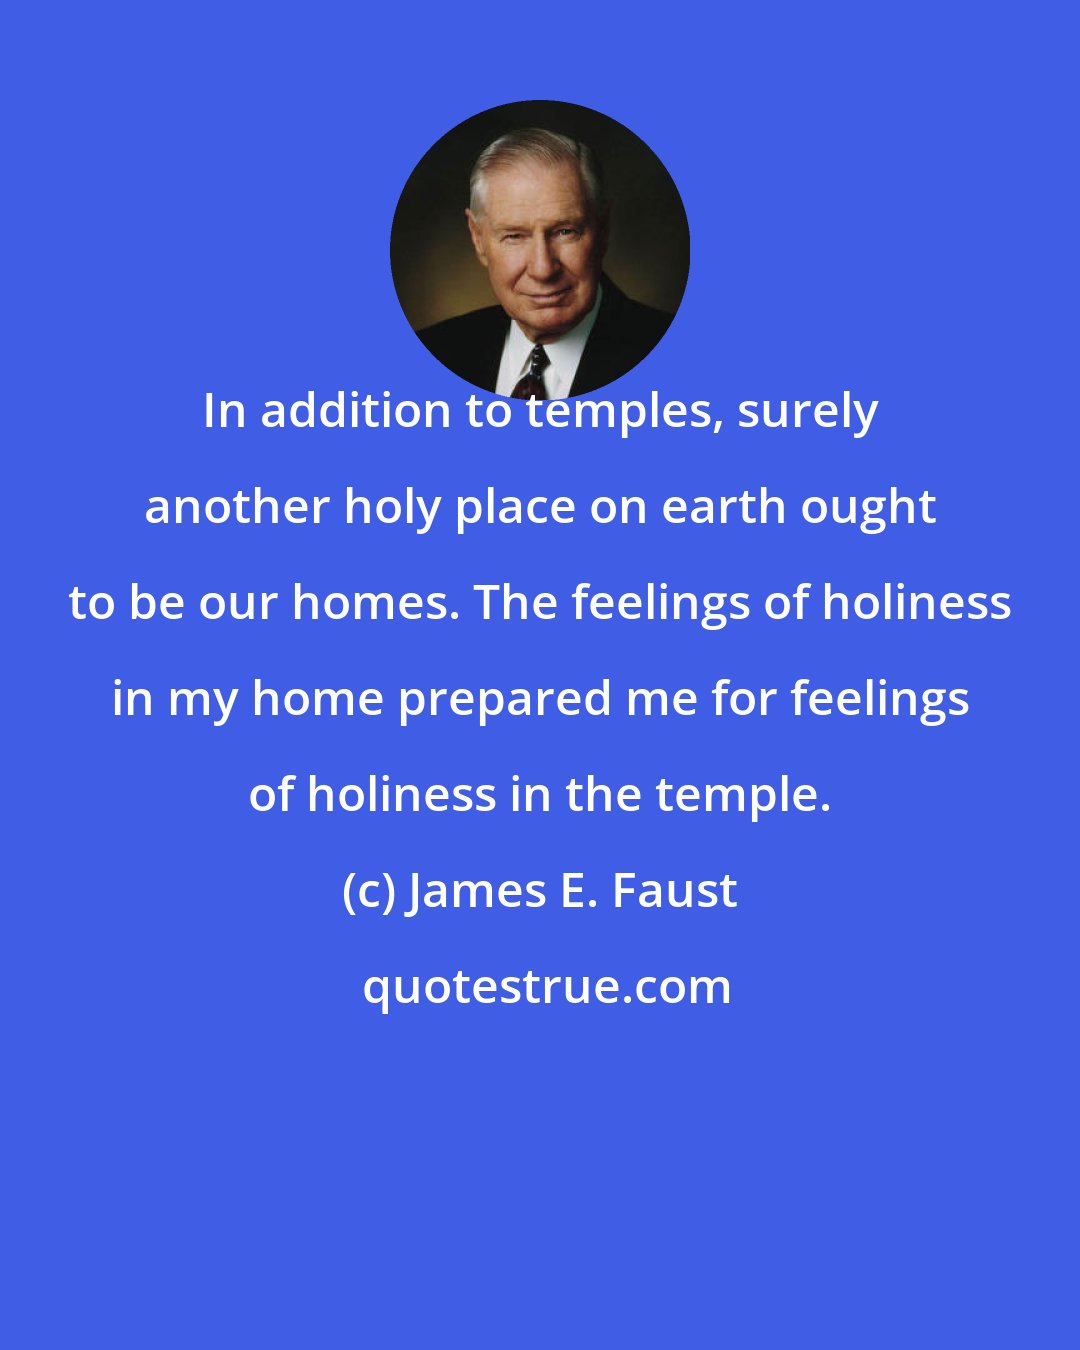 James E. Faust: In addition to temples, surely another holy place on earth ought to be our homes. The feelings of holiness in my home prepared me for feelings of holiness in the temple.